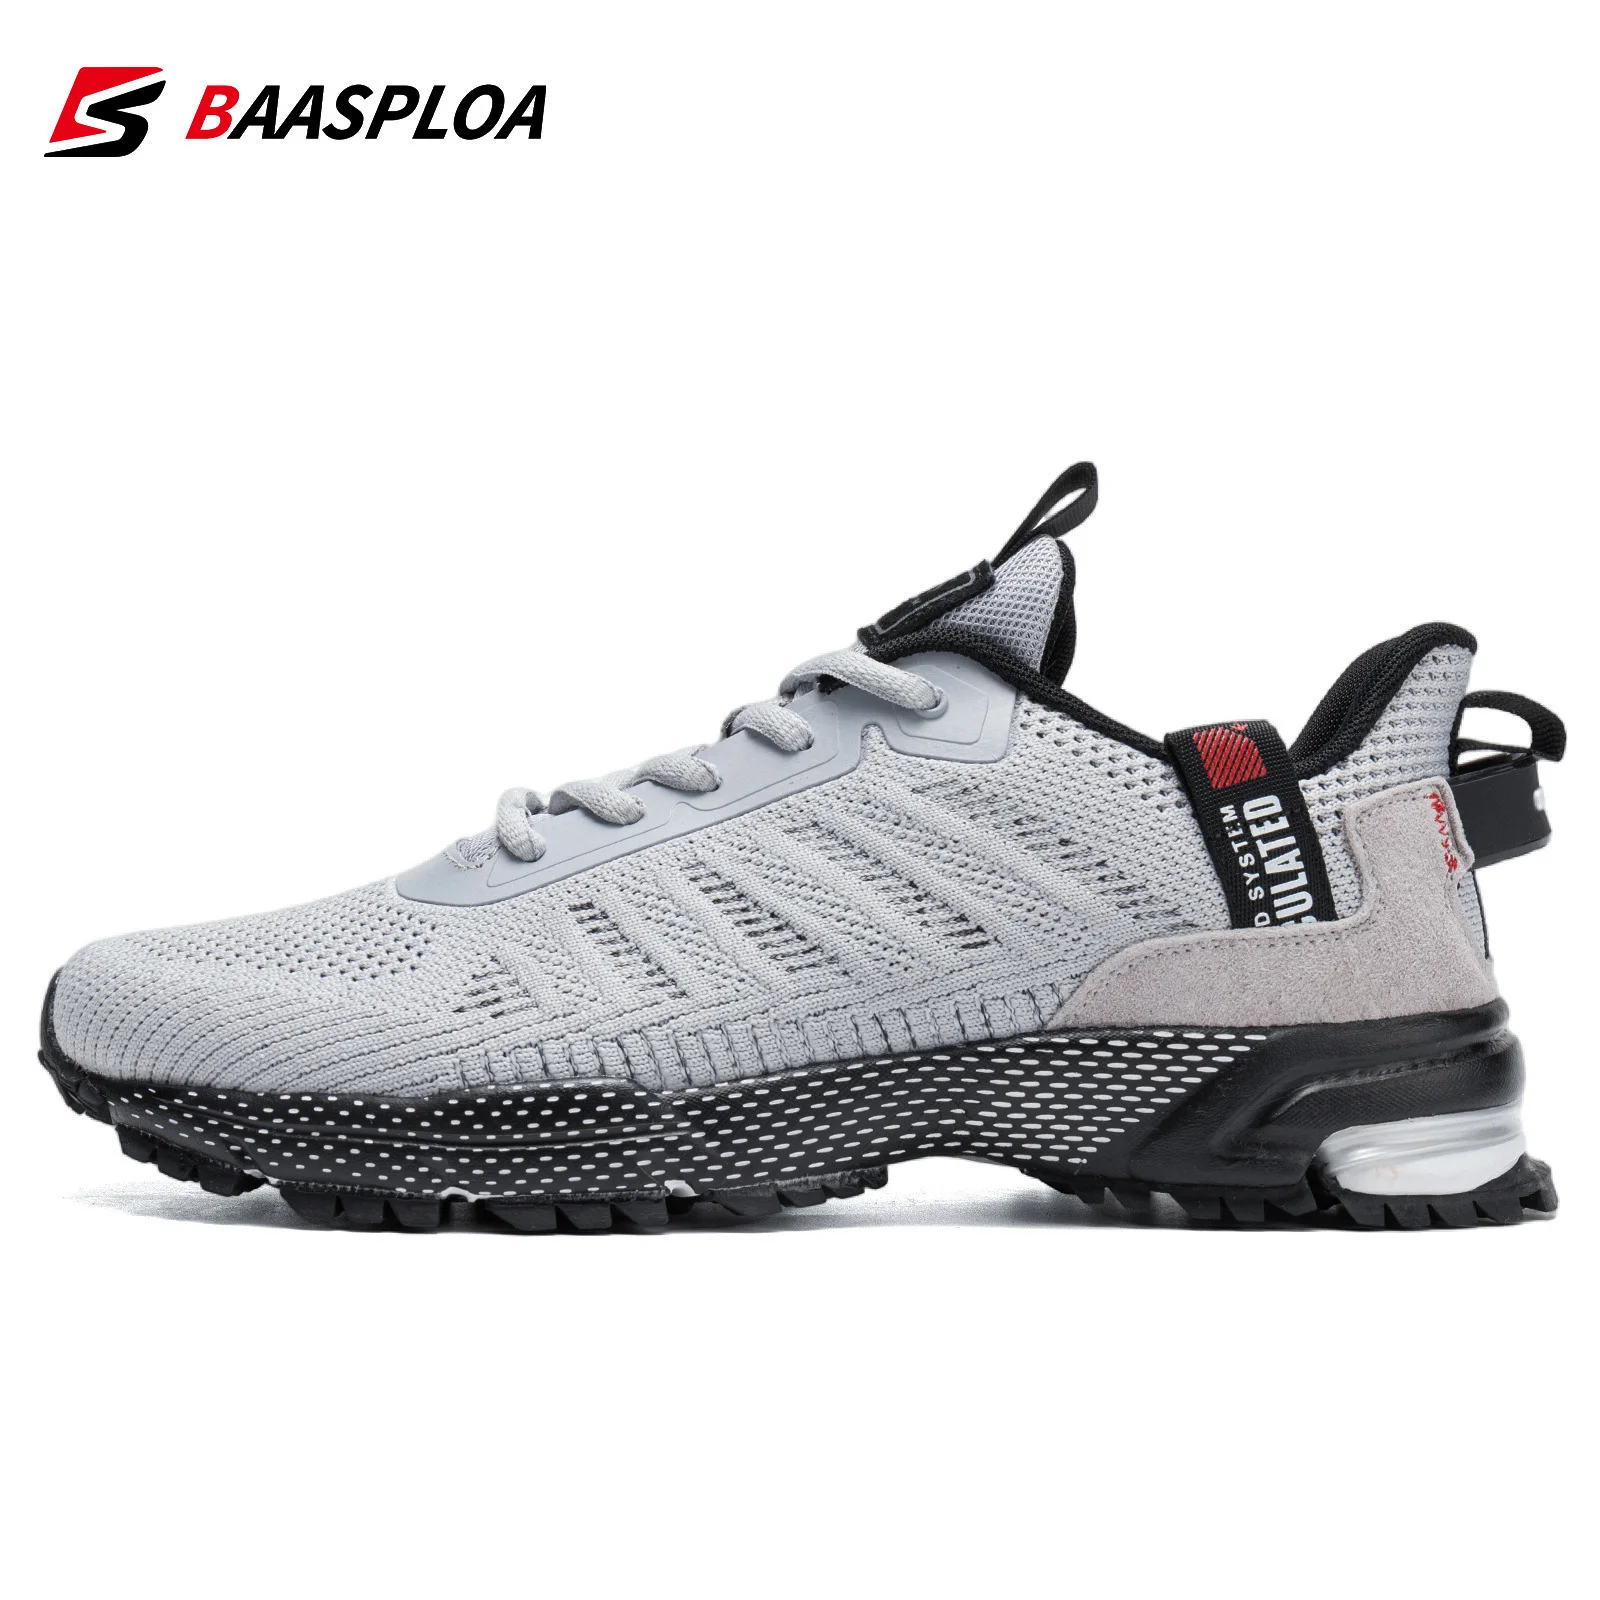 Baasploa Professional Running Shoes For Men Lightweight Men's Designer Mesh Sneakers Lace-up Male Outdoor Sports Tennis Shoe - Running Shoes - AliExpress